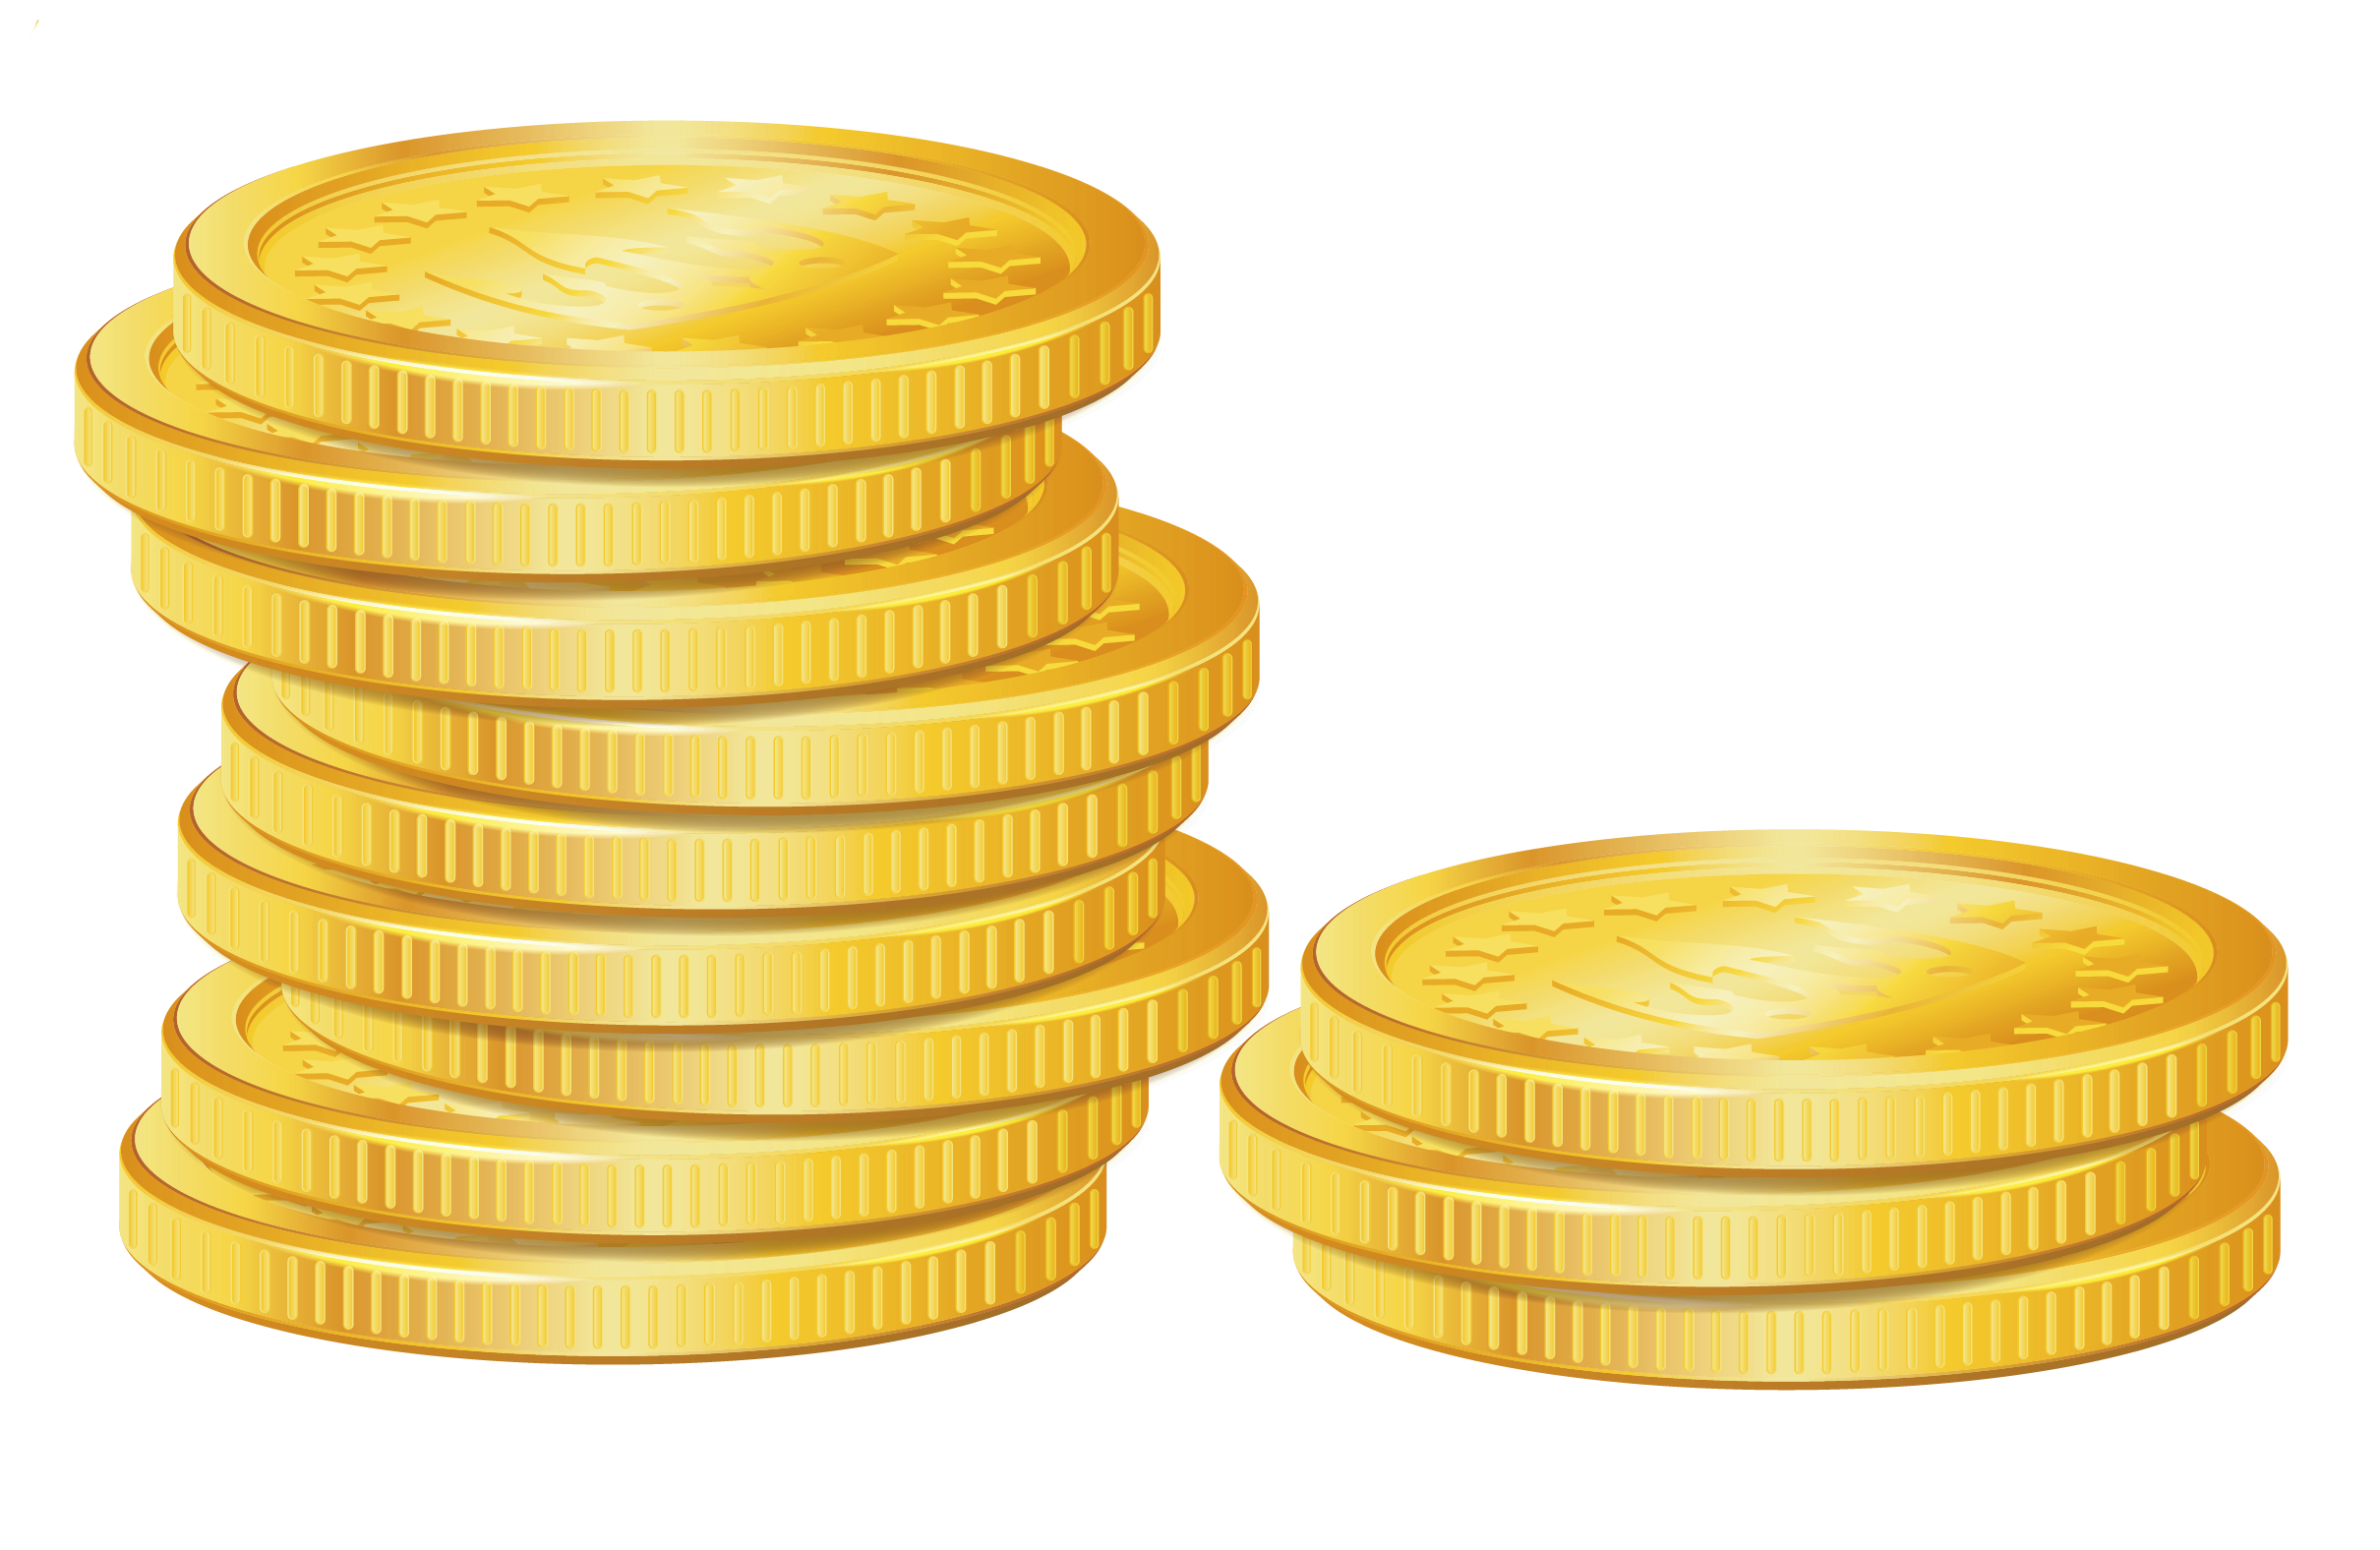 Trends For Stack Of Gold Coin